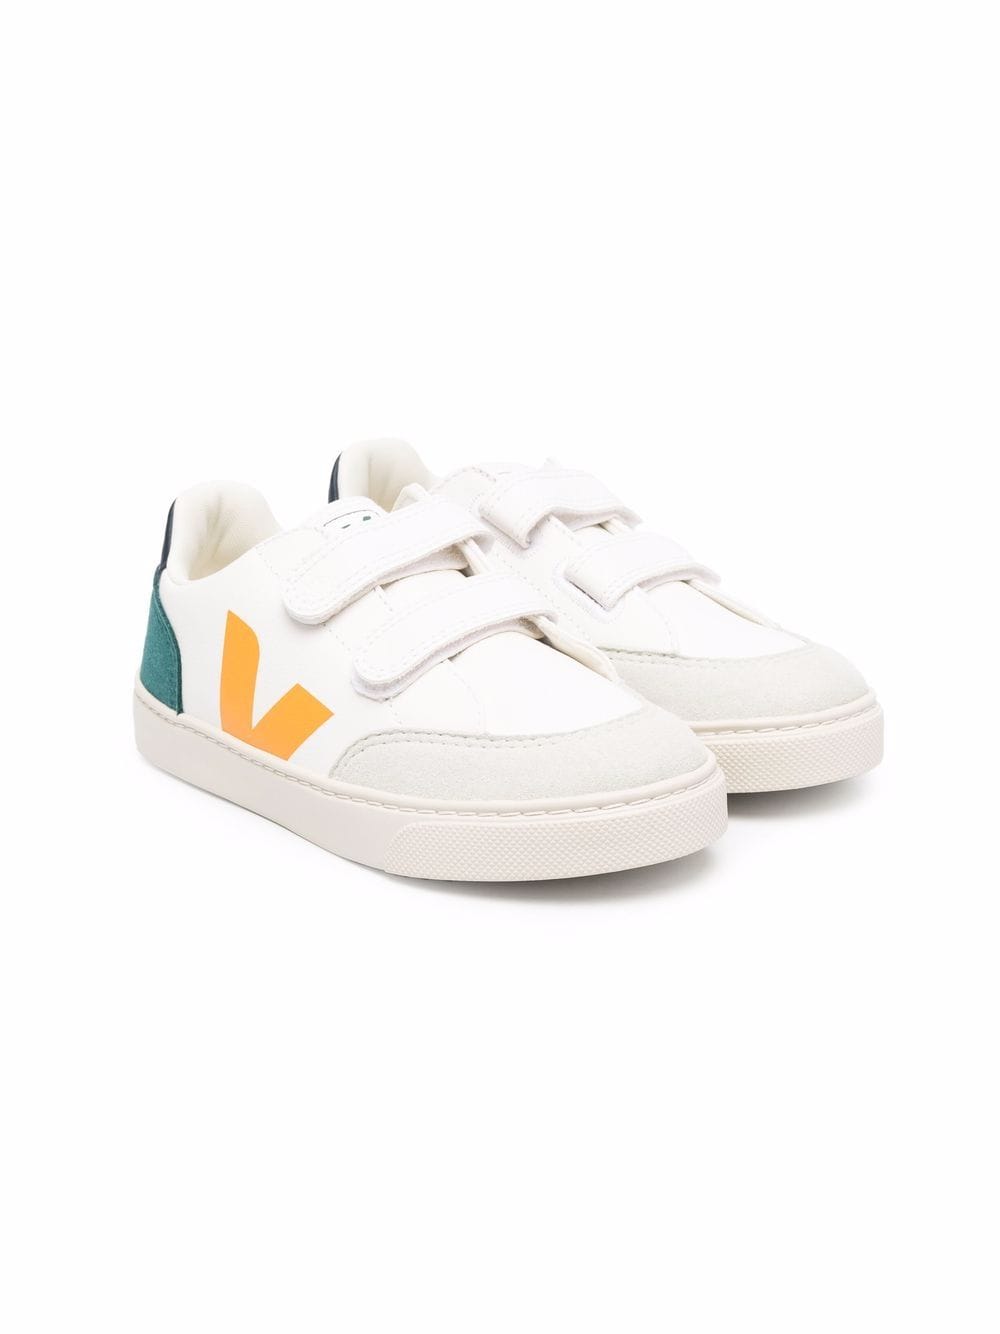 VEJA Kids touch-strap fastening sneakers - White